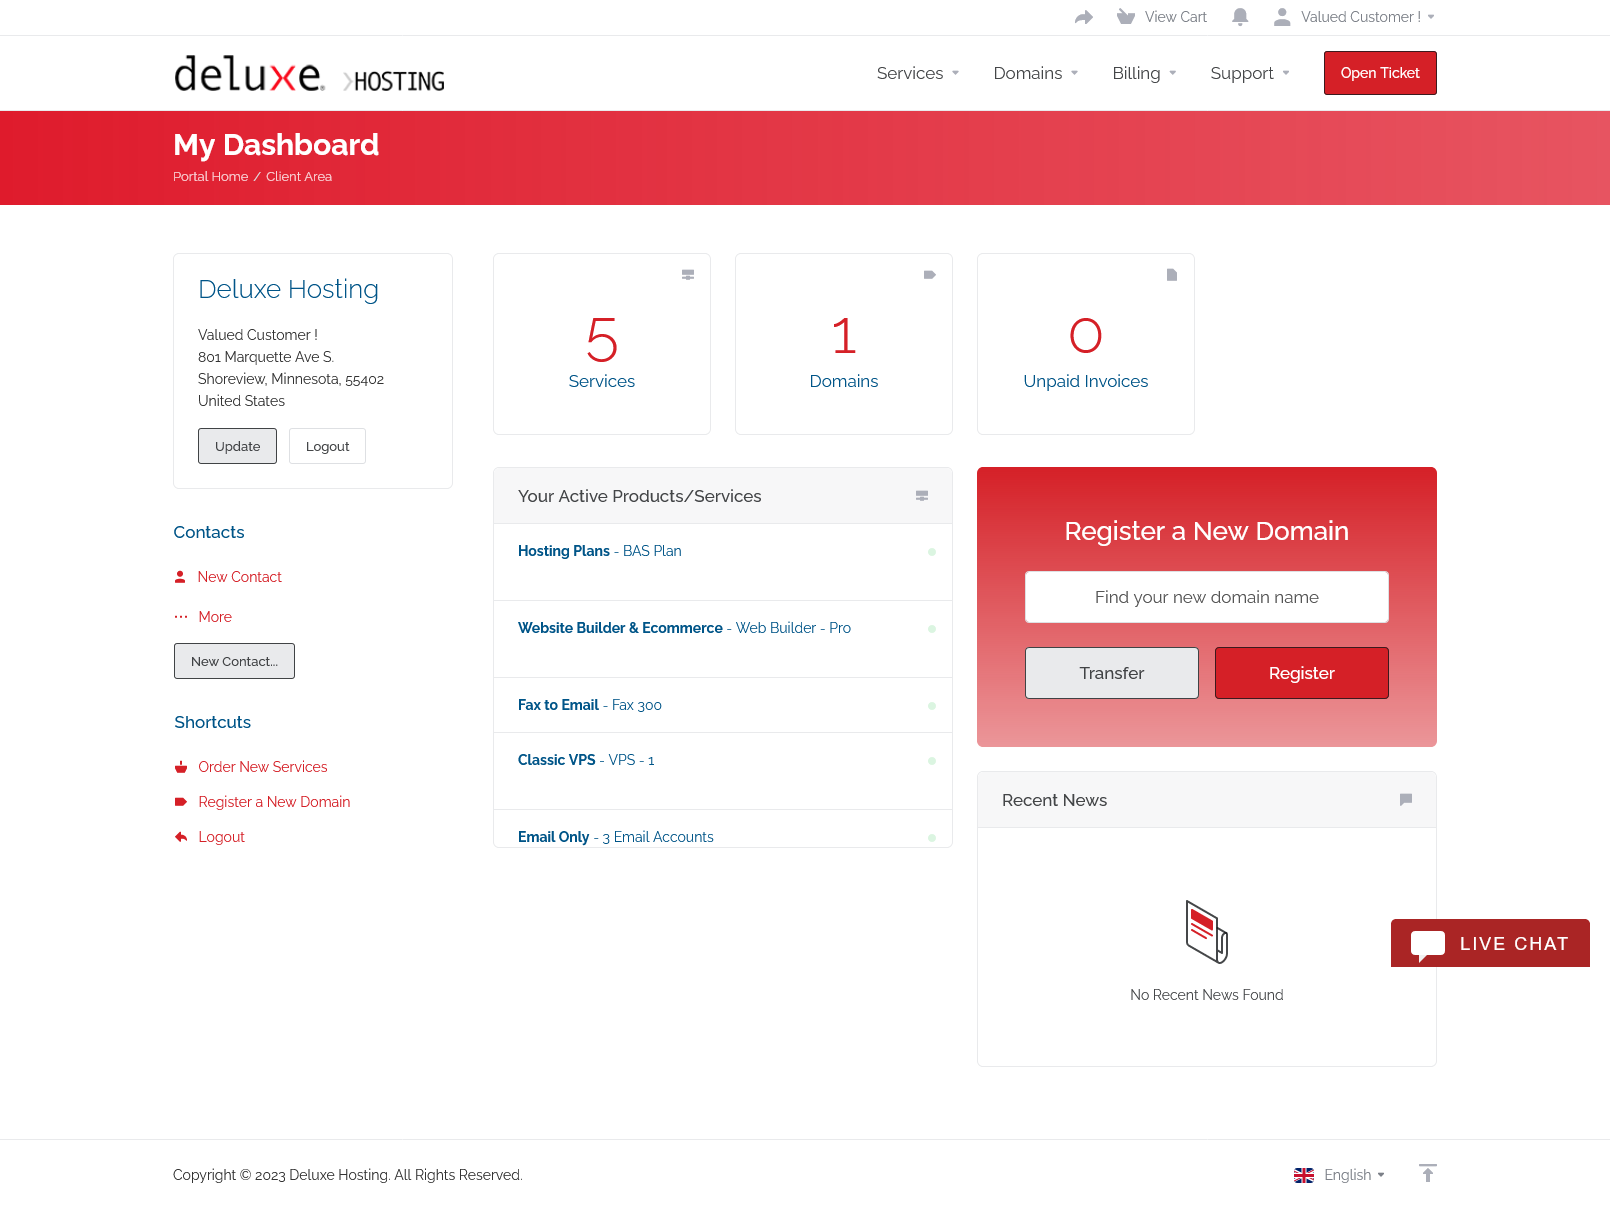 Deluxe Hosting Home Page